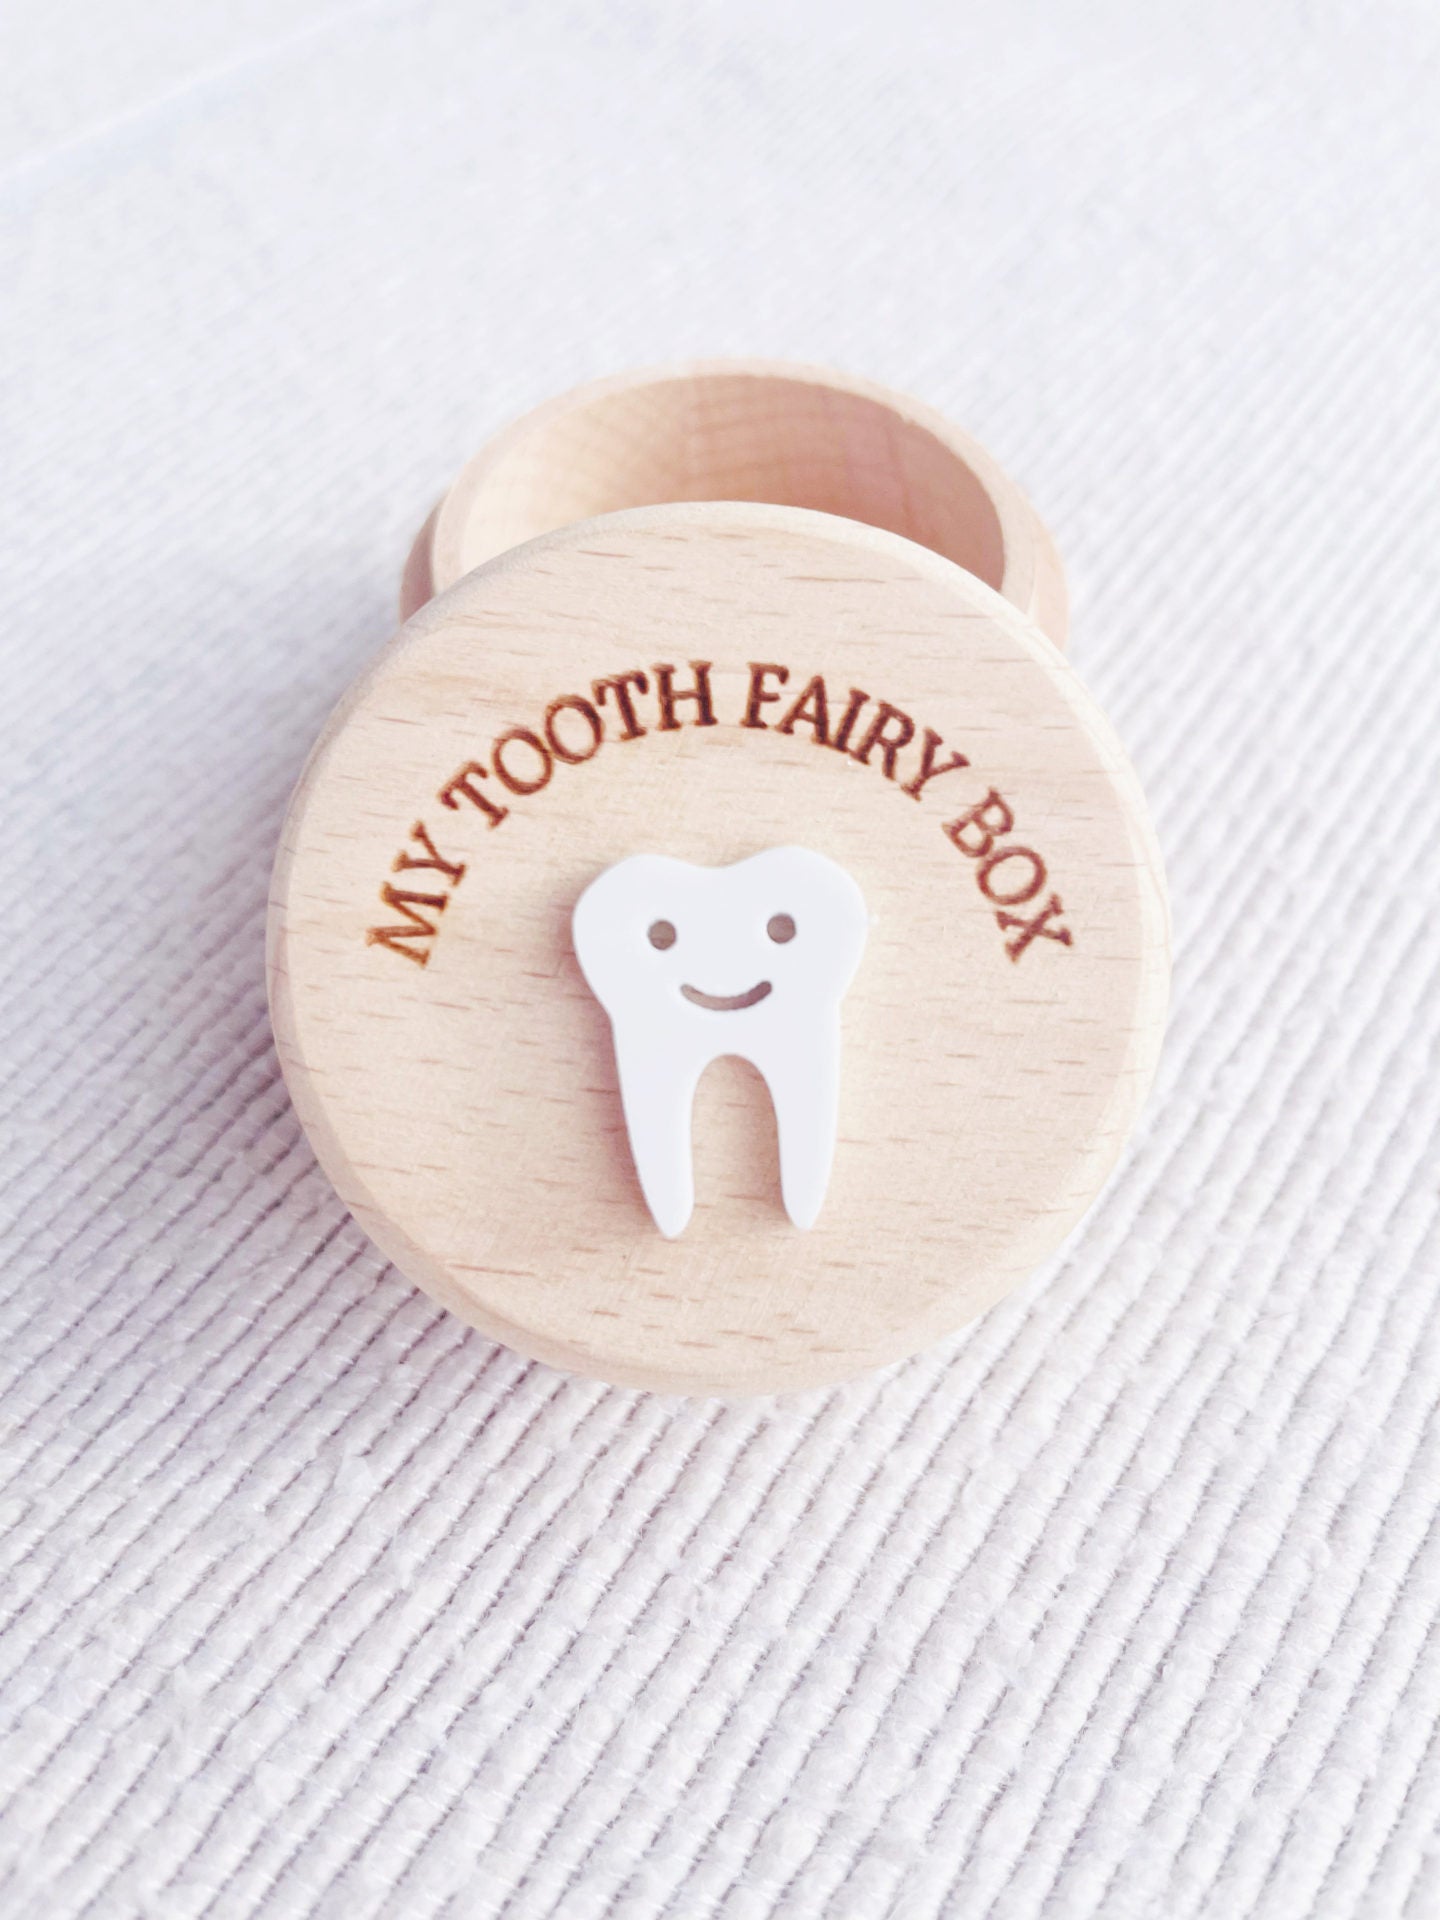 Tooth Fairy Box - 3D Tooth